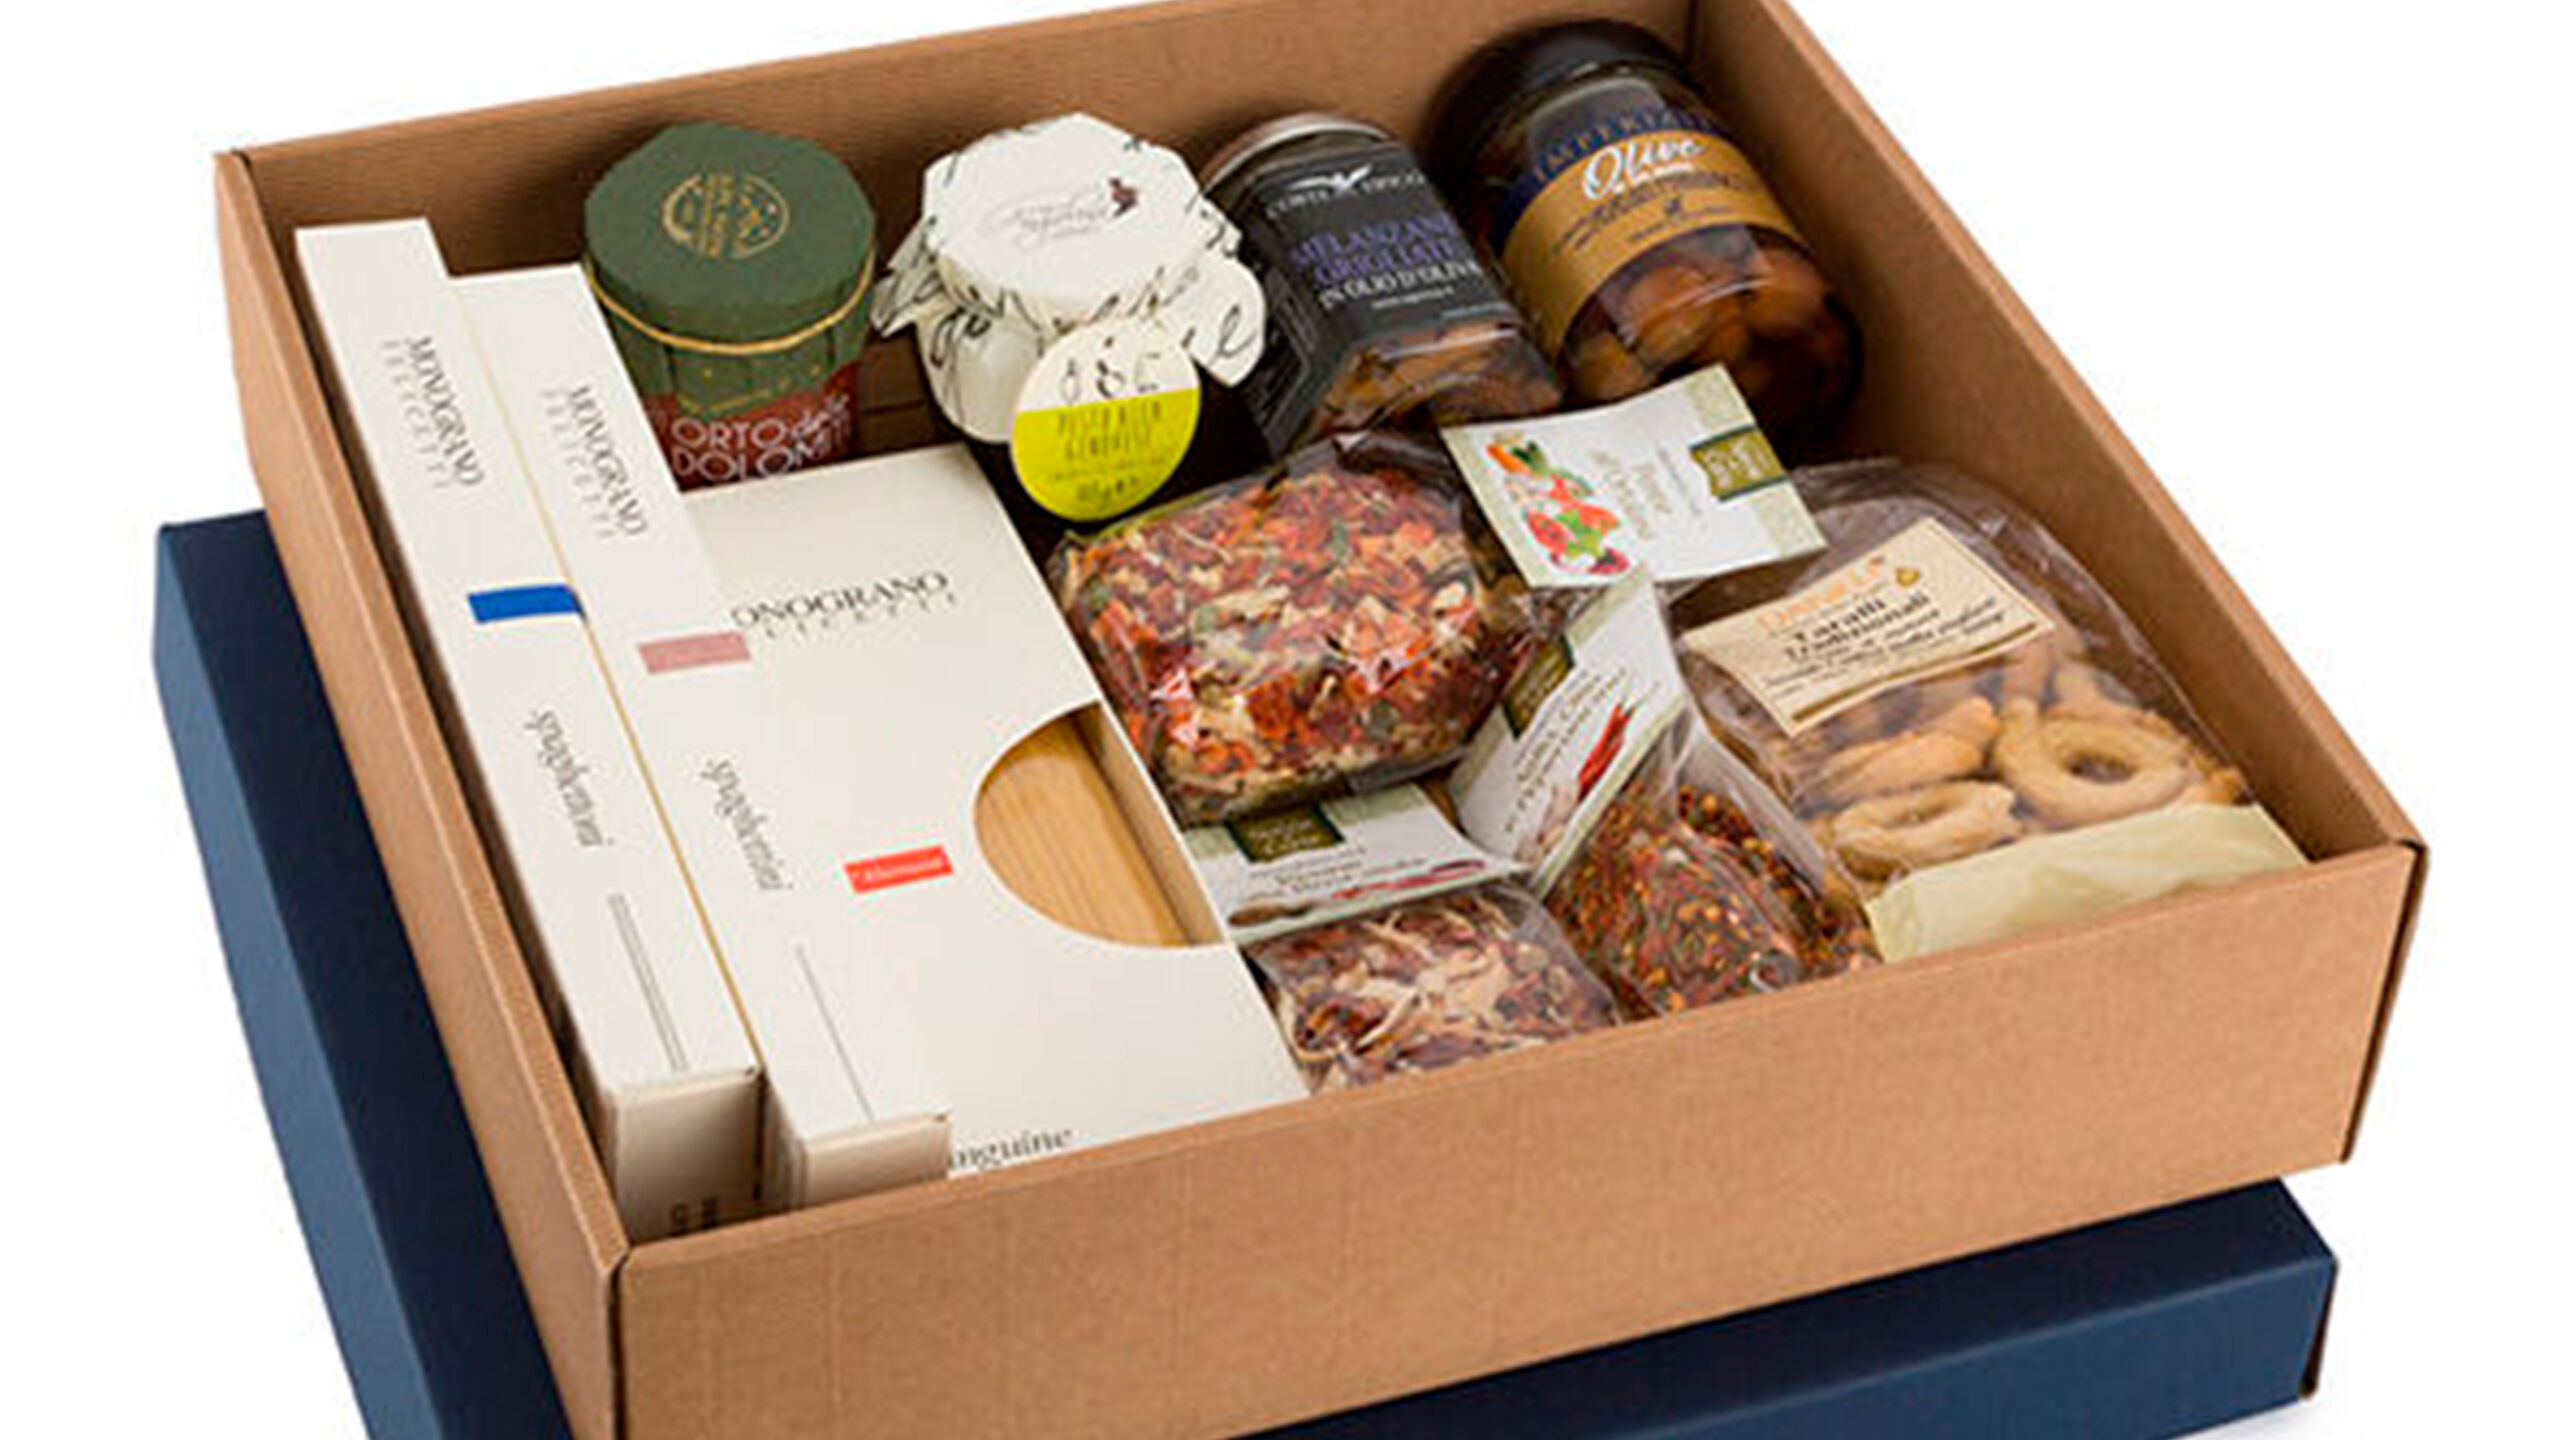 PARTNERSHIP APARTHOTEL - AGRARIA RIVA DEL GARDA - Find out about our gourmet box sets!